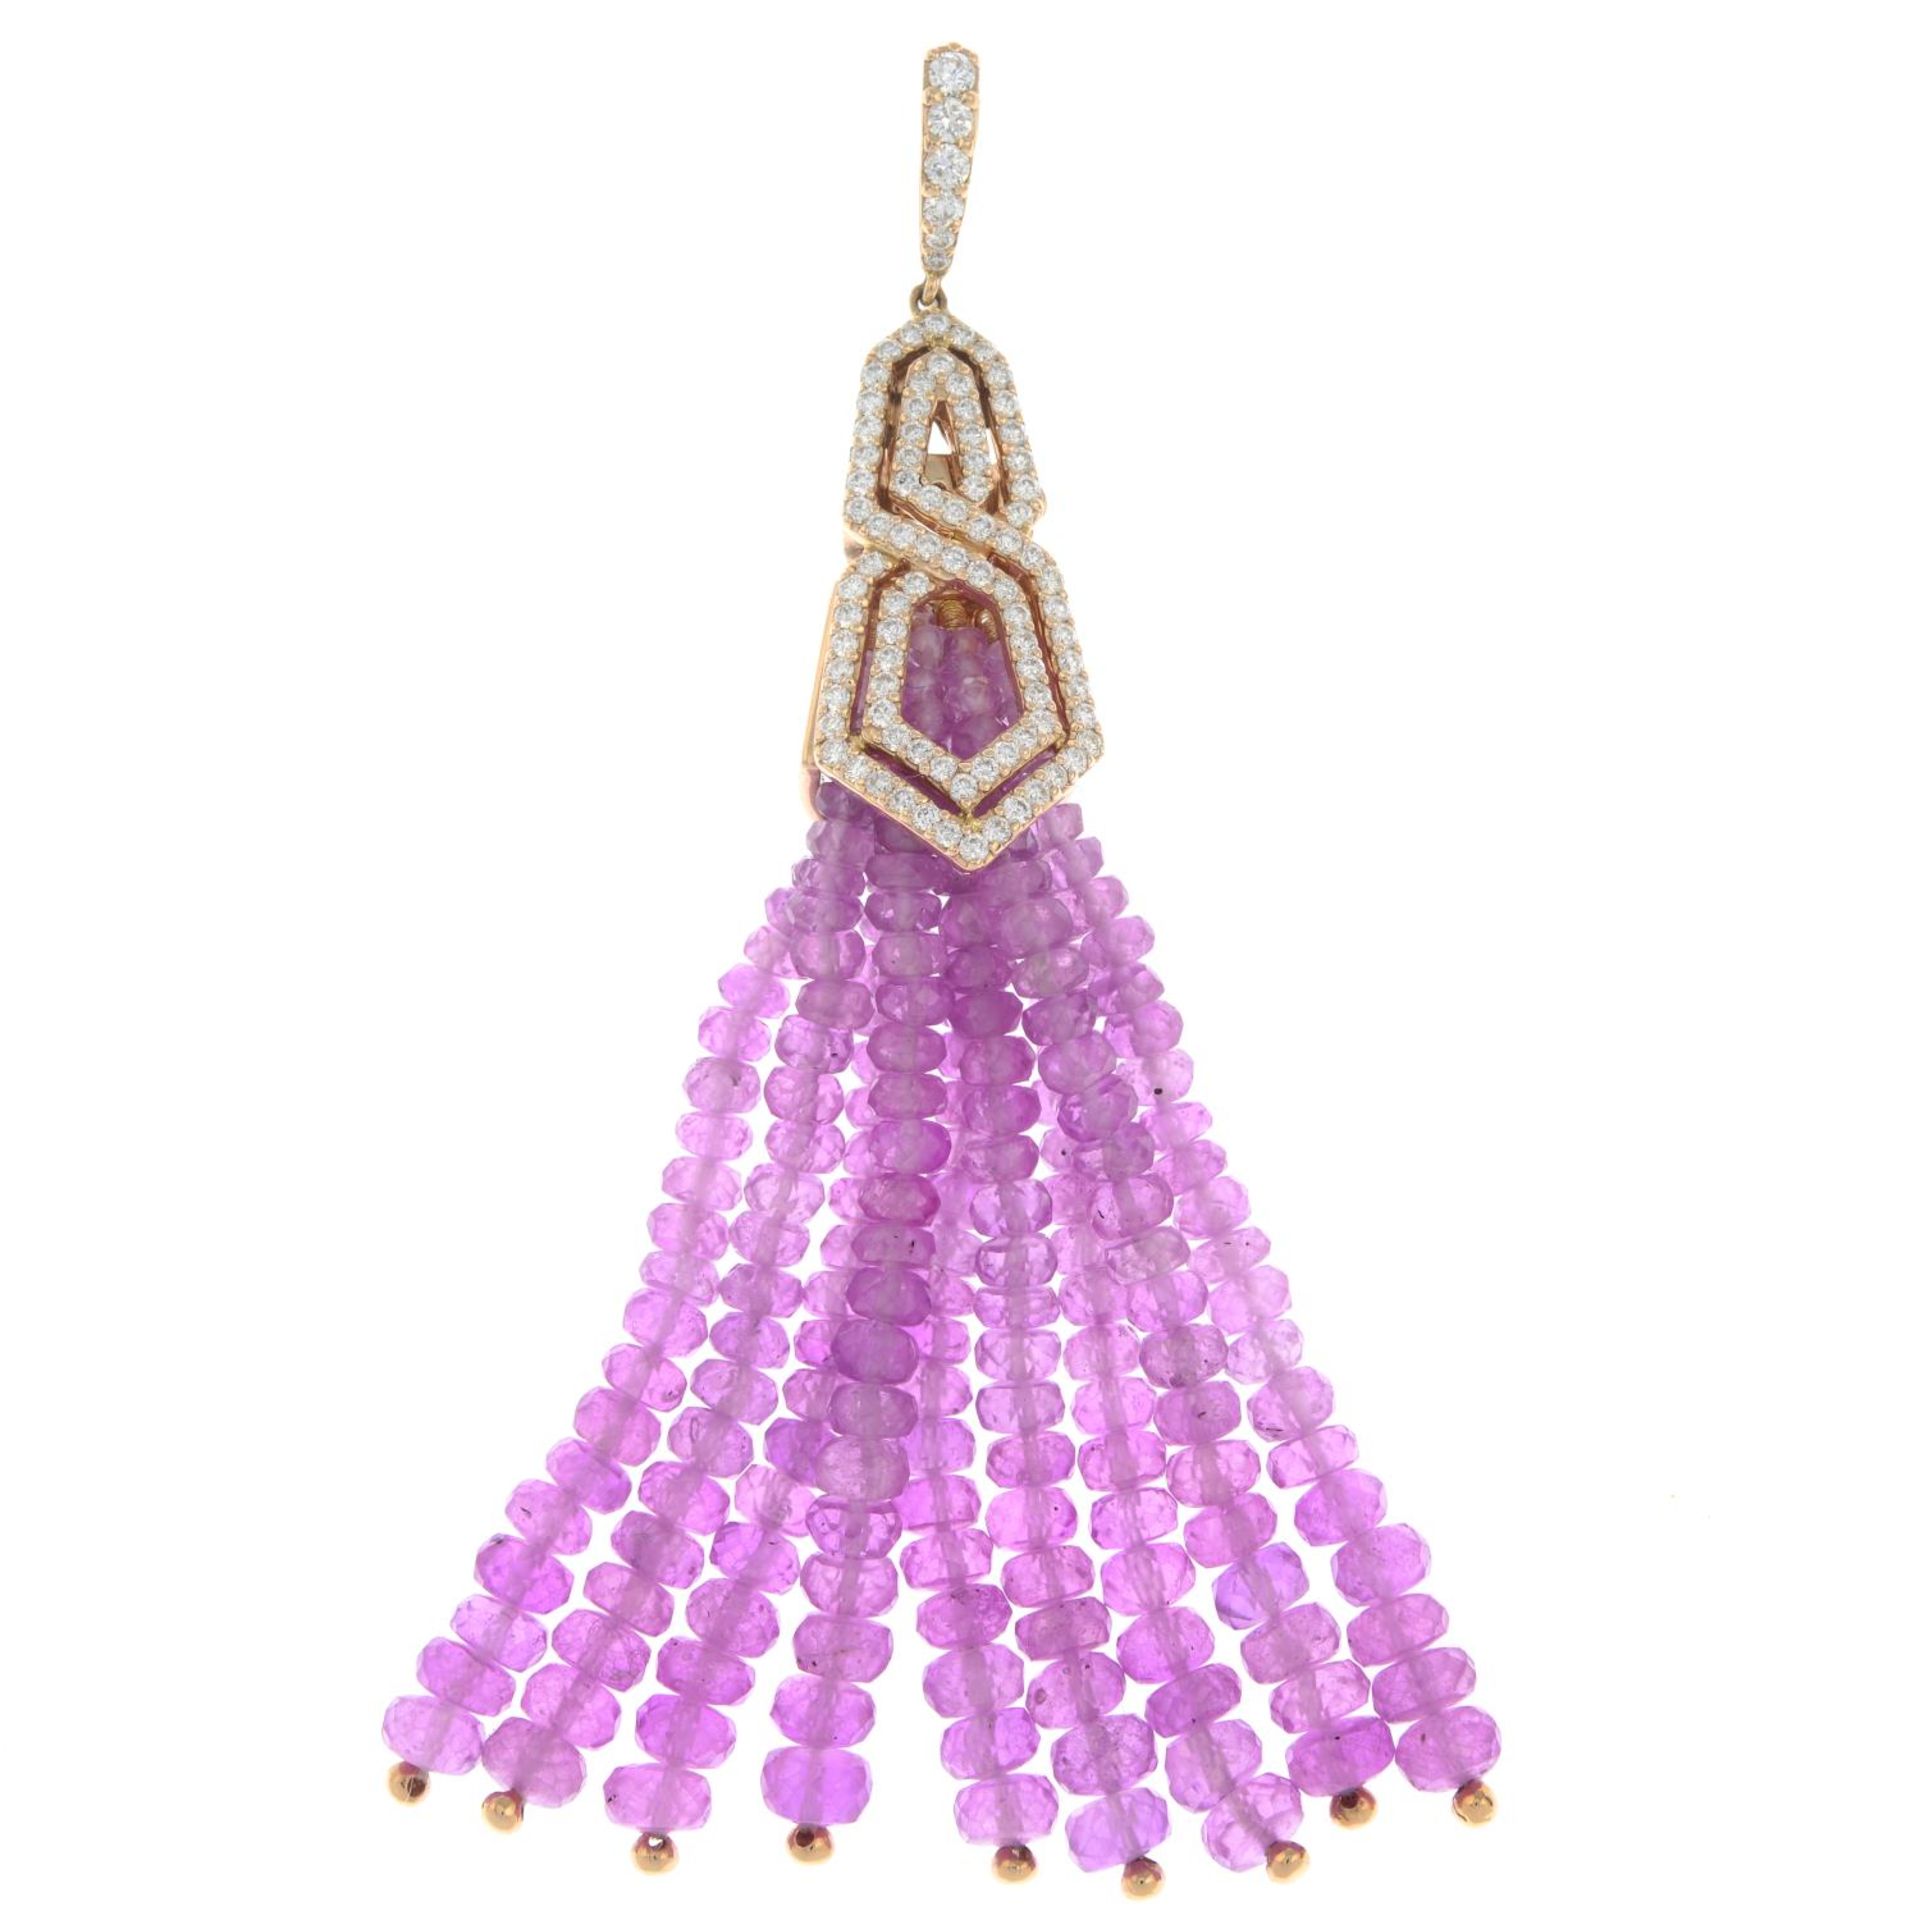 An 18ct gold pink sapphire and brilliant-cut diamond 'The London Collection' tassel